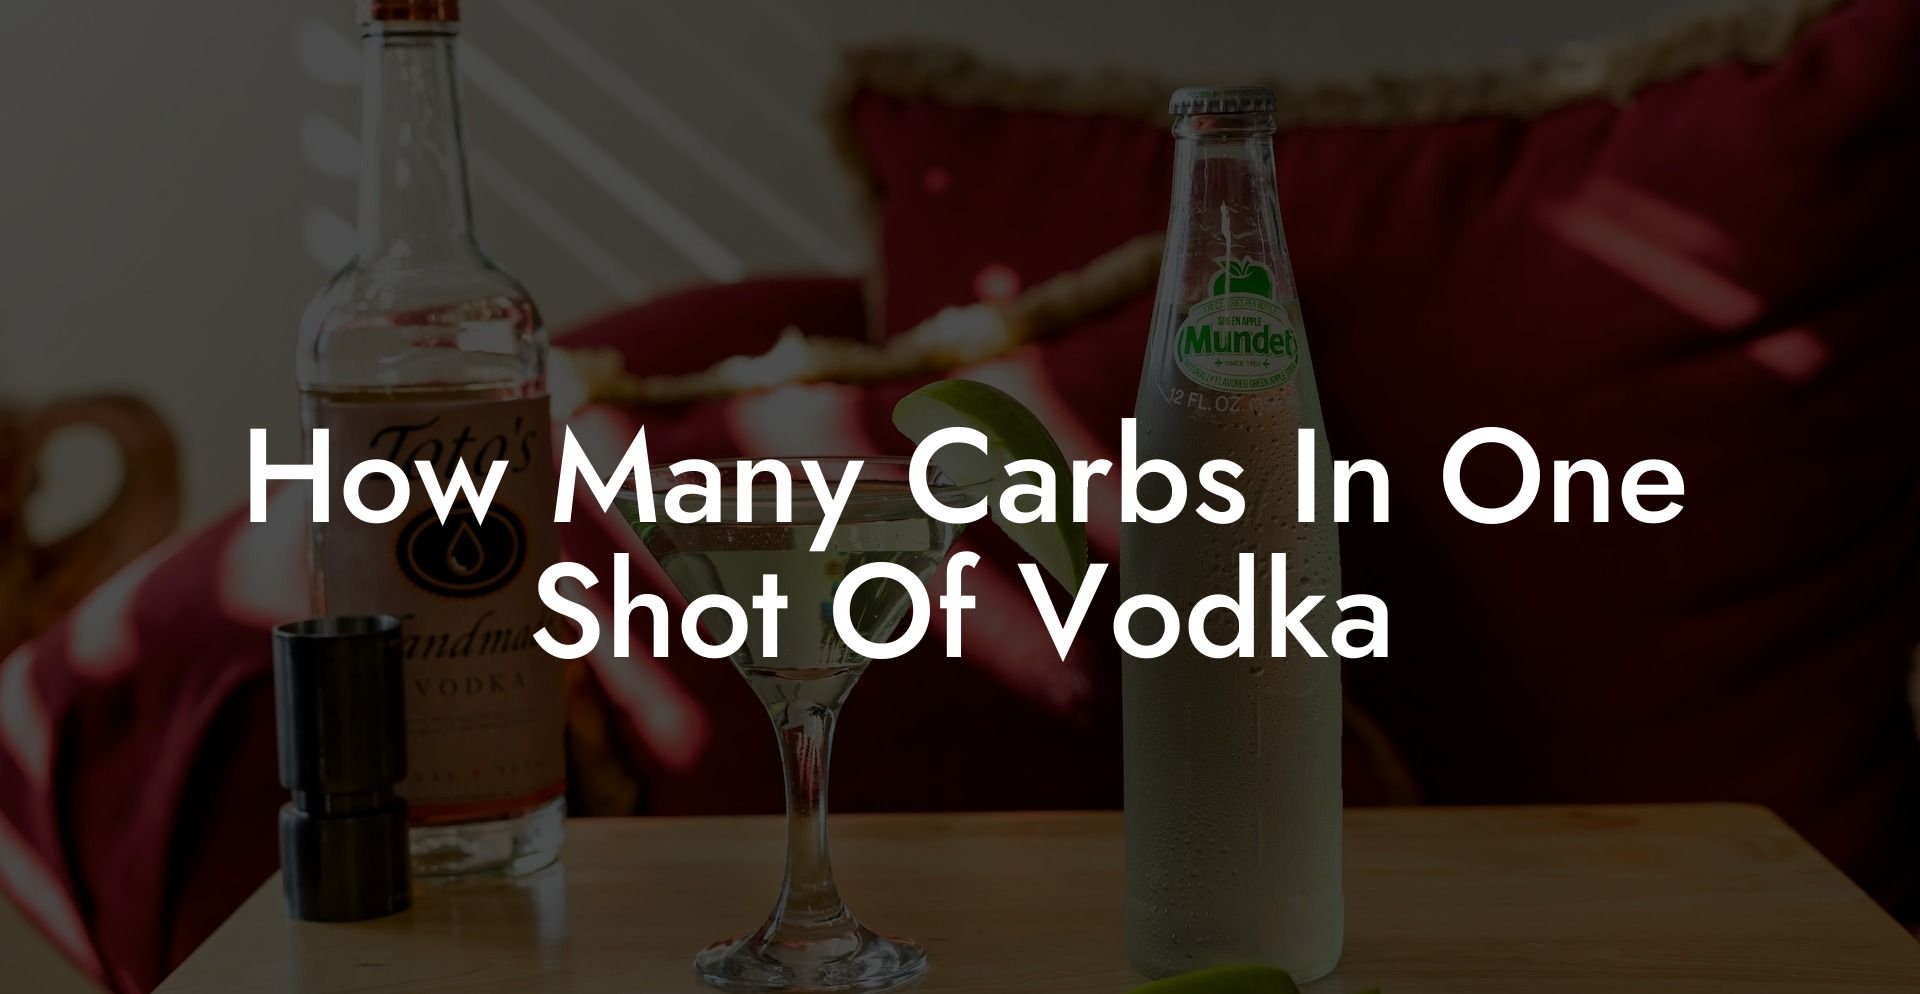 How Many Carbs In One Shot Of Vodka